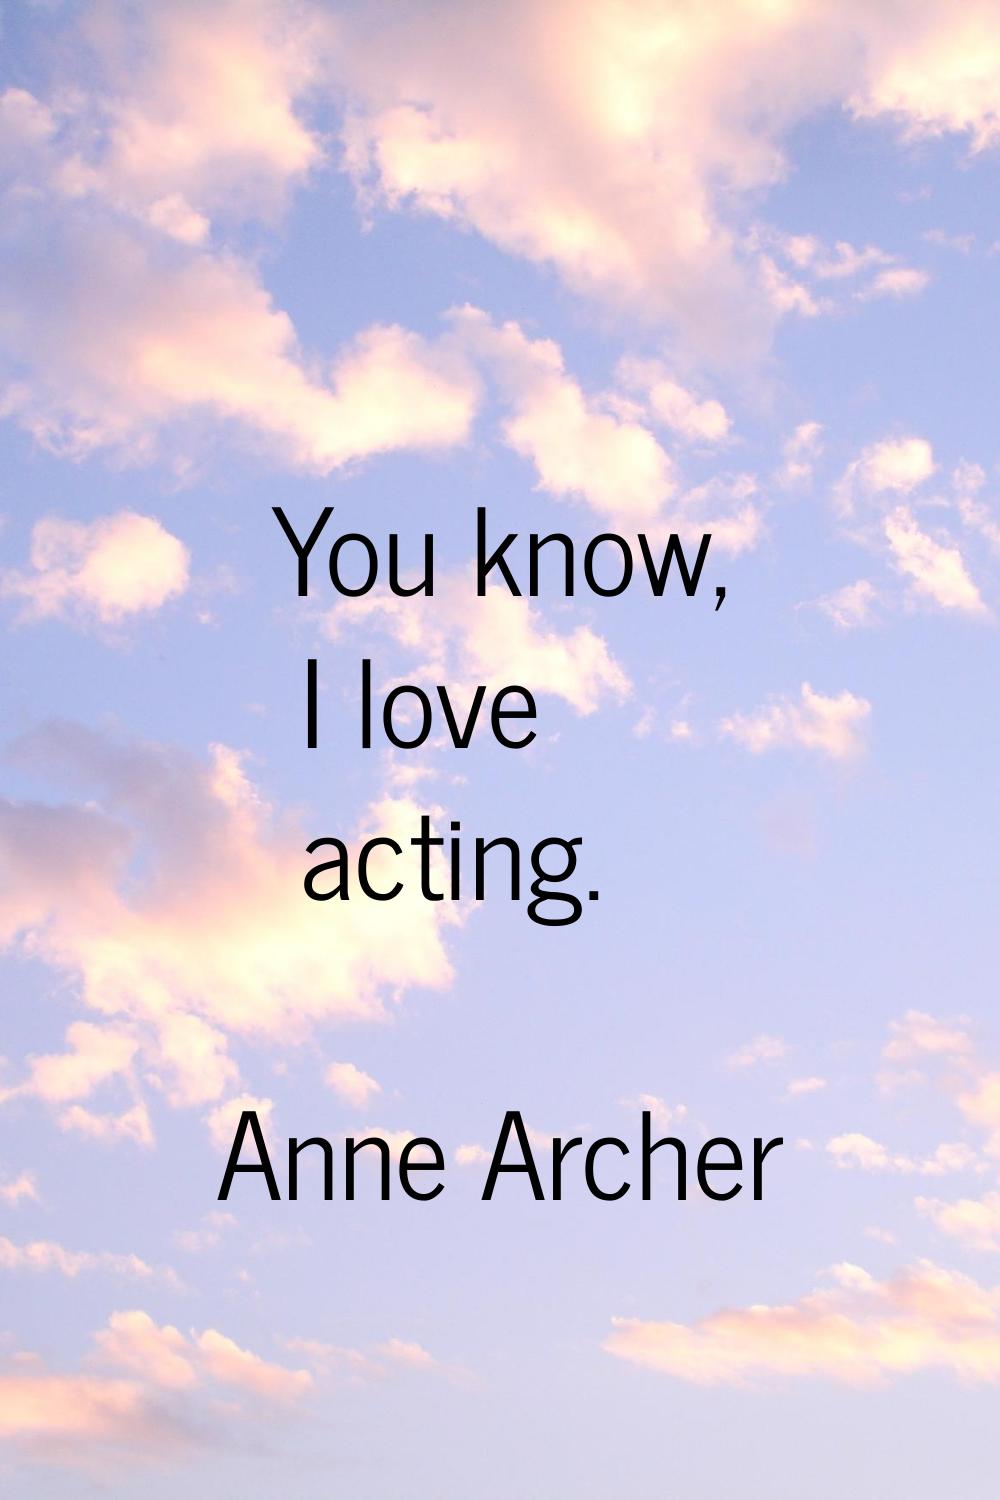 You know, I love acting.